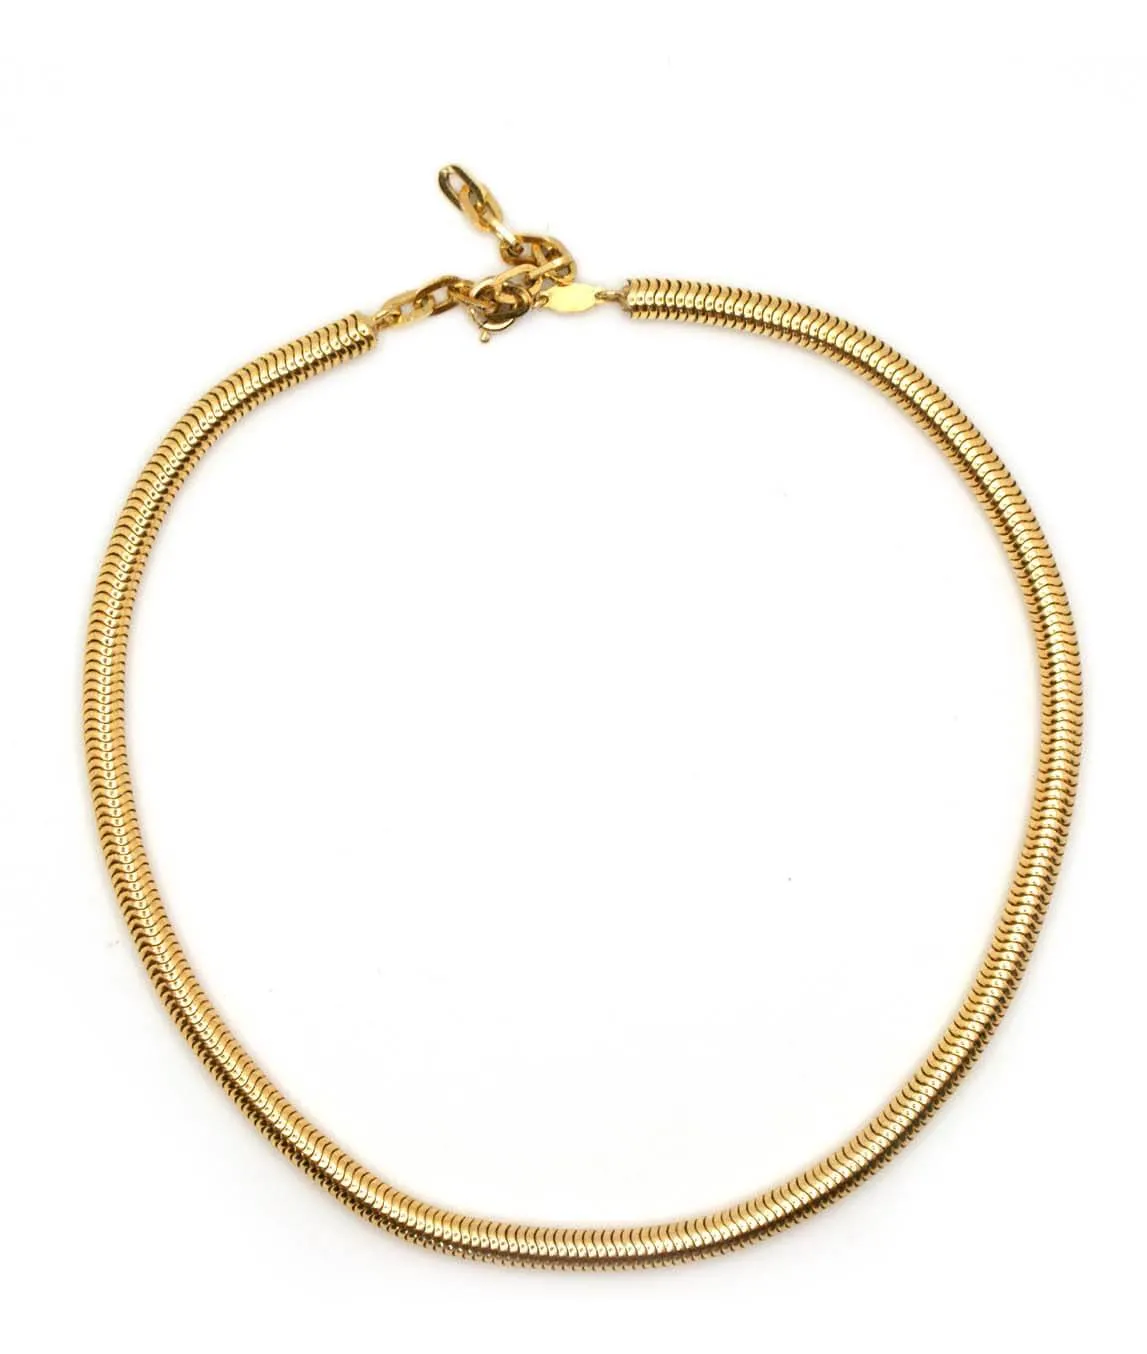 Round gold plated snake chain by Grossé 1973